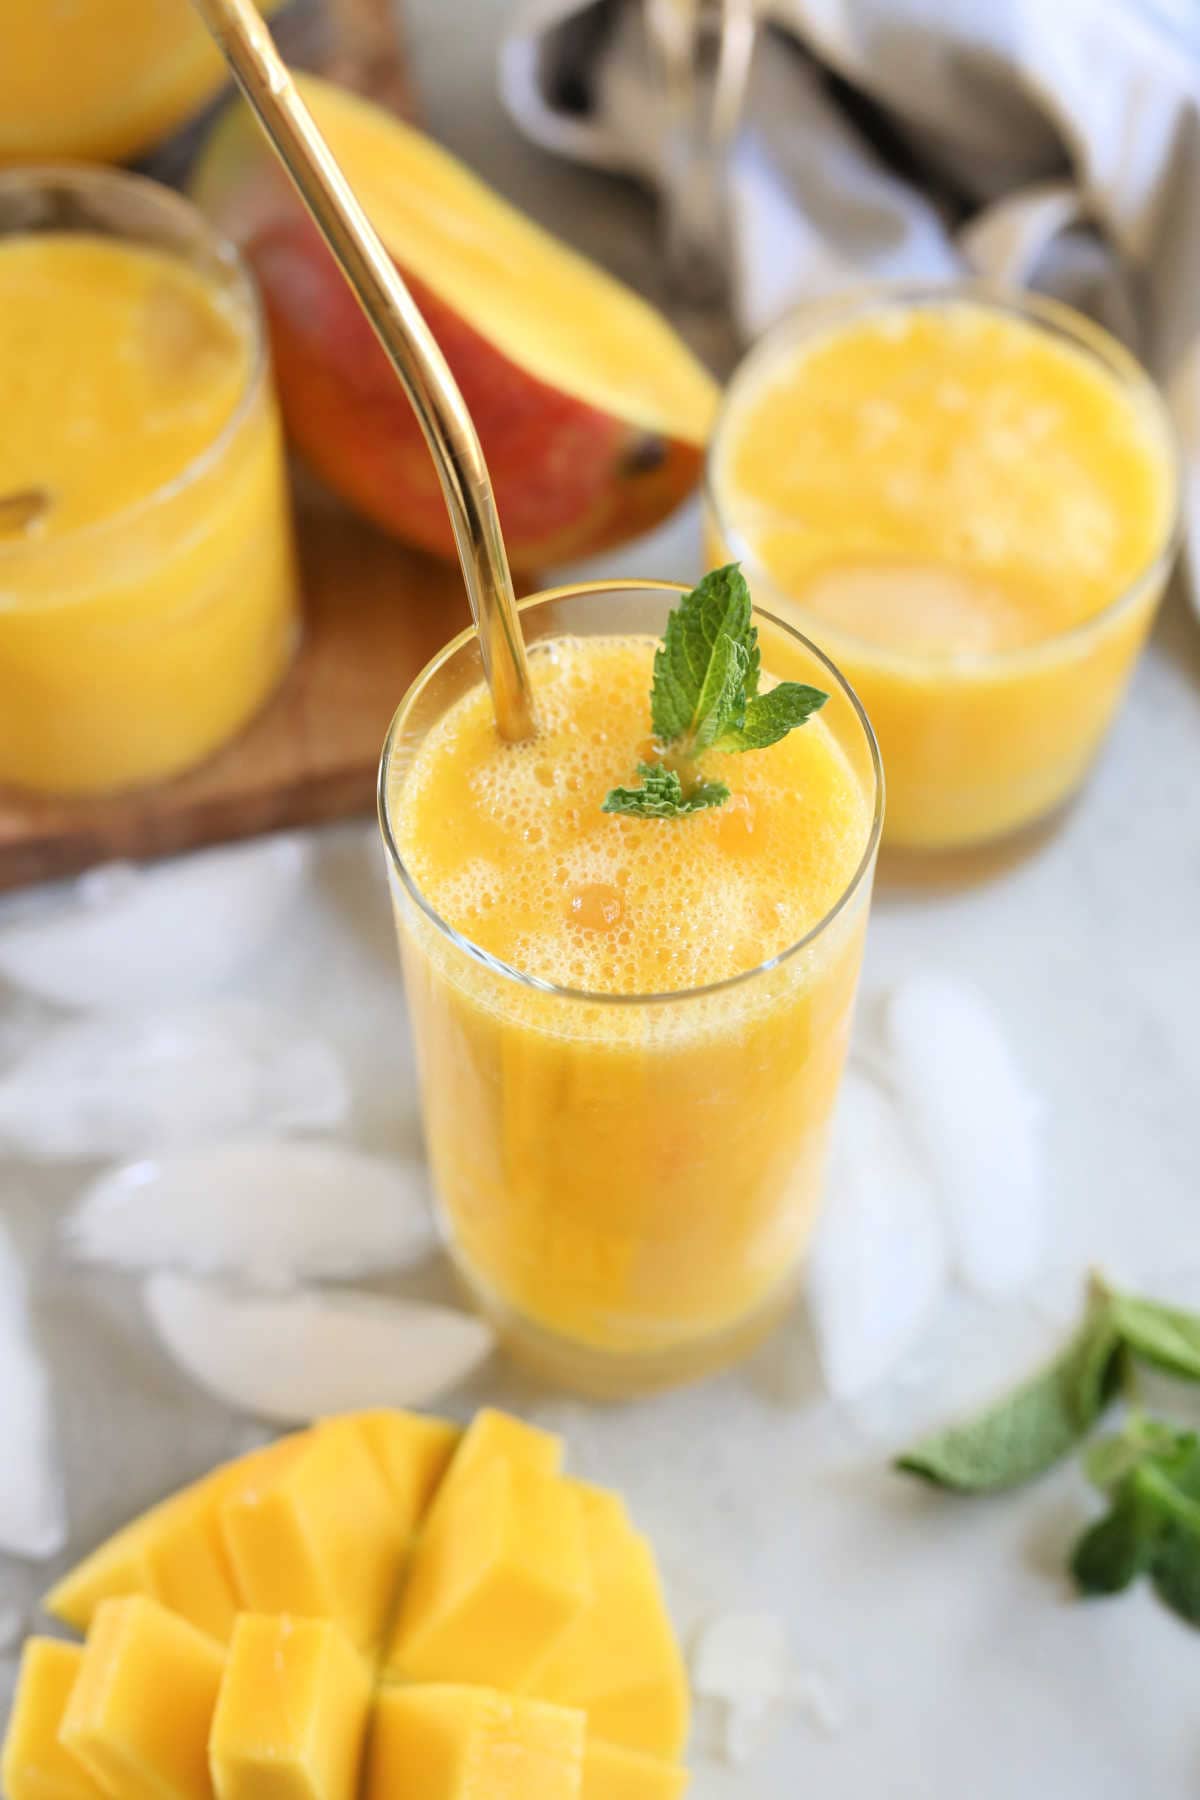 Mango nectar drink recipe in a glass with gold straw